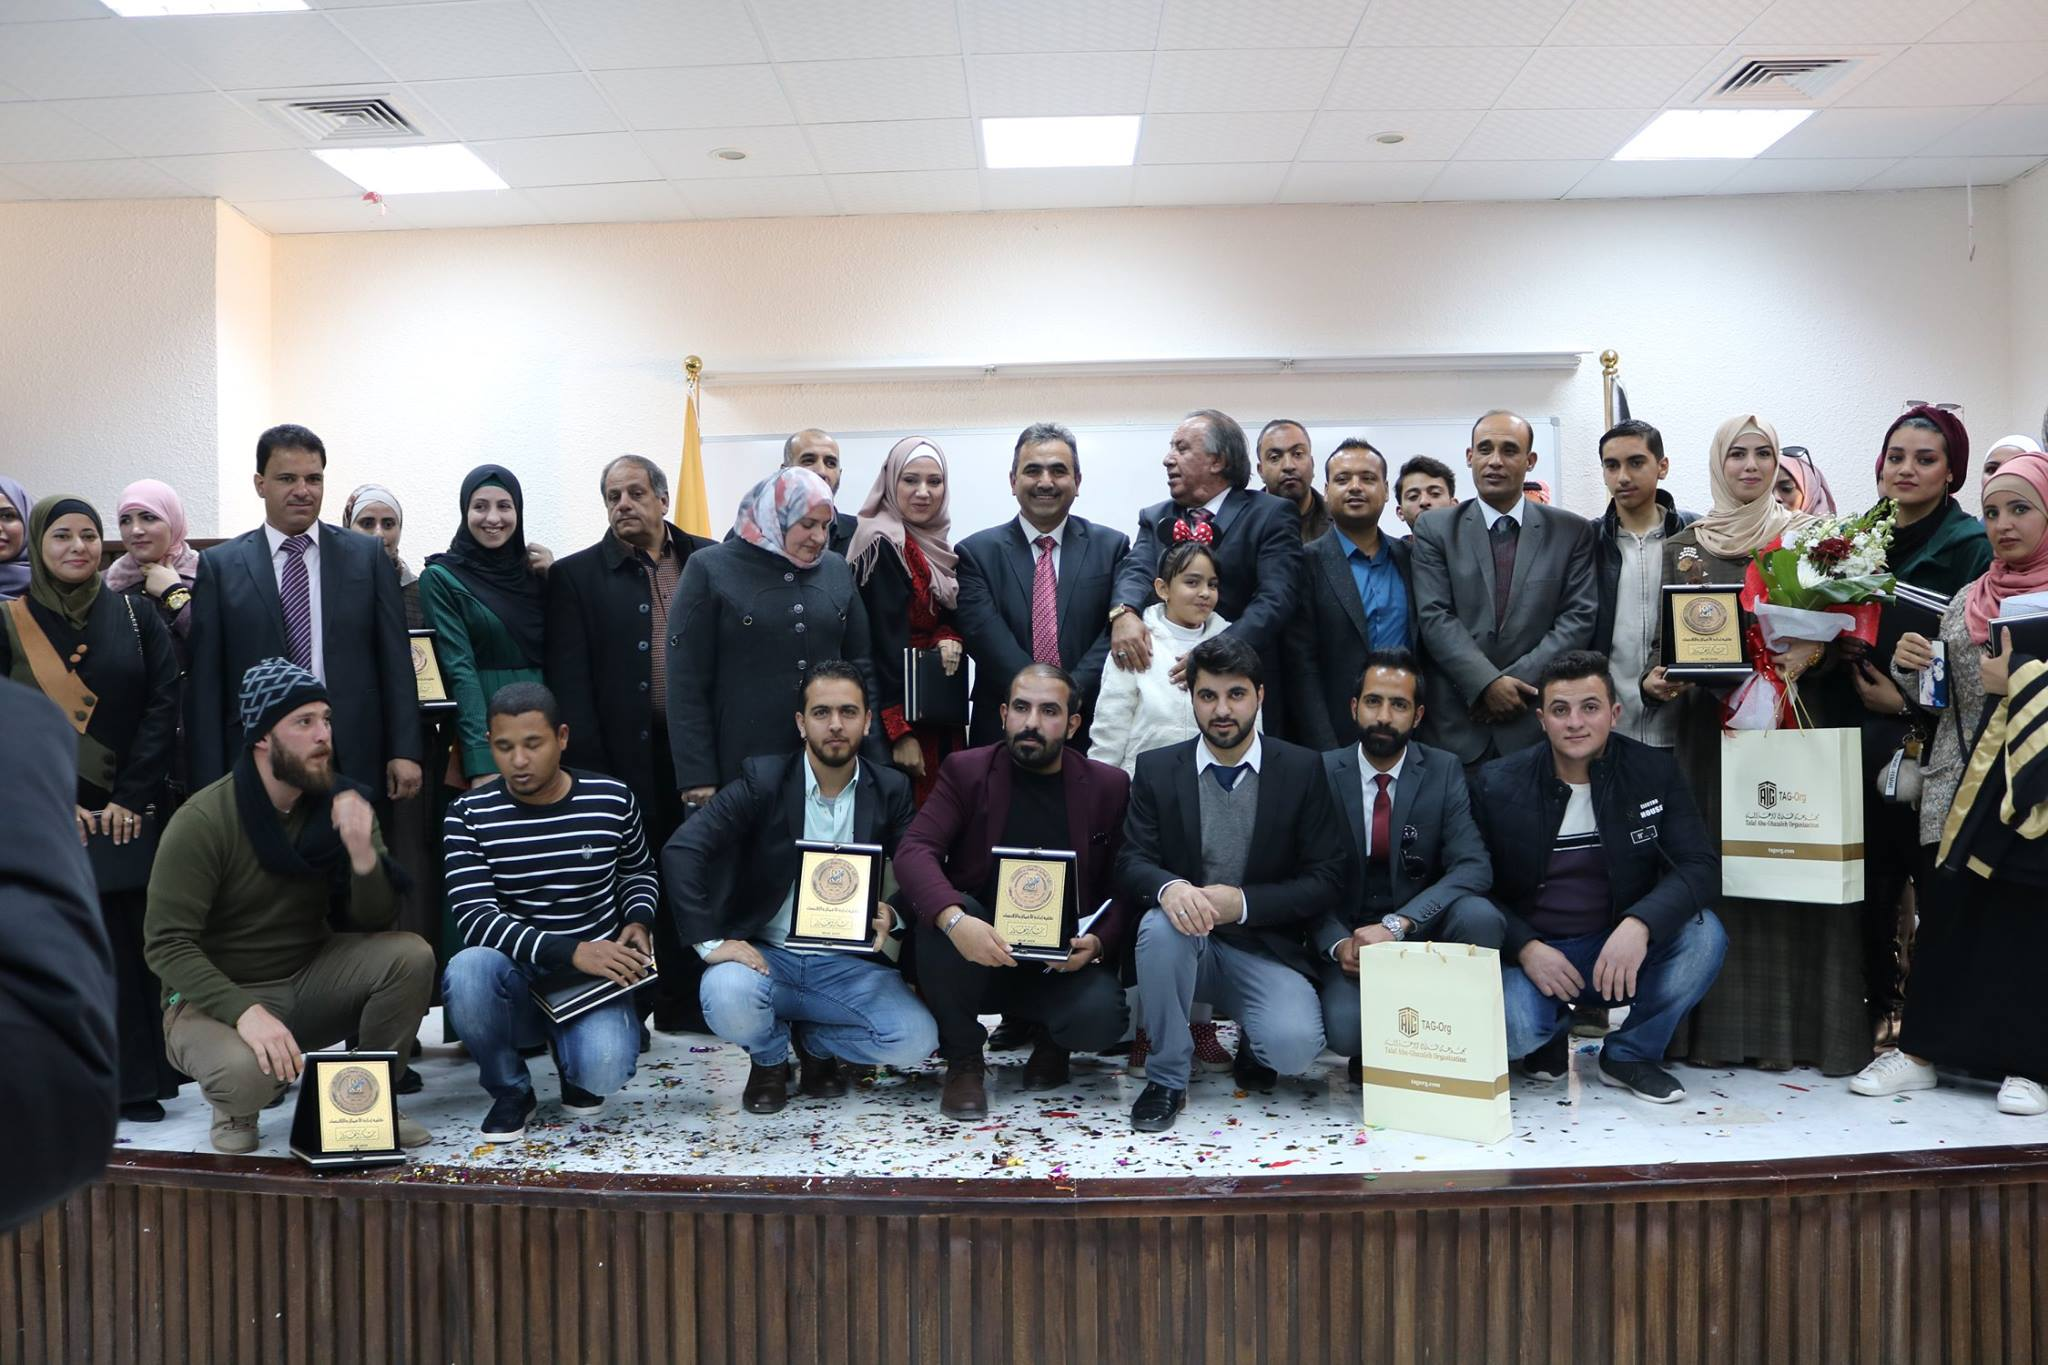 Honoring the first and outstanding students in the Faculty of Business and Economics